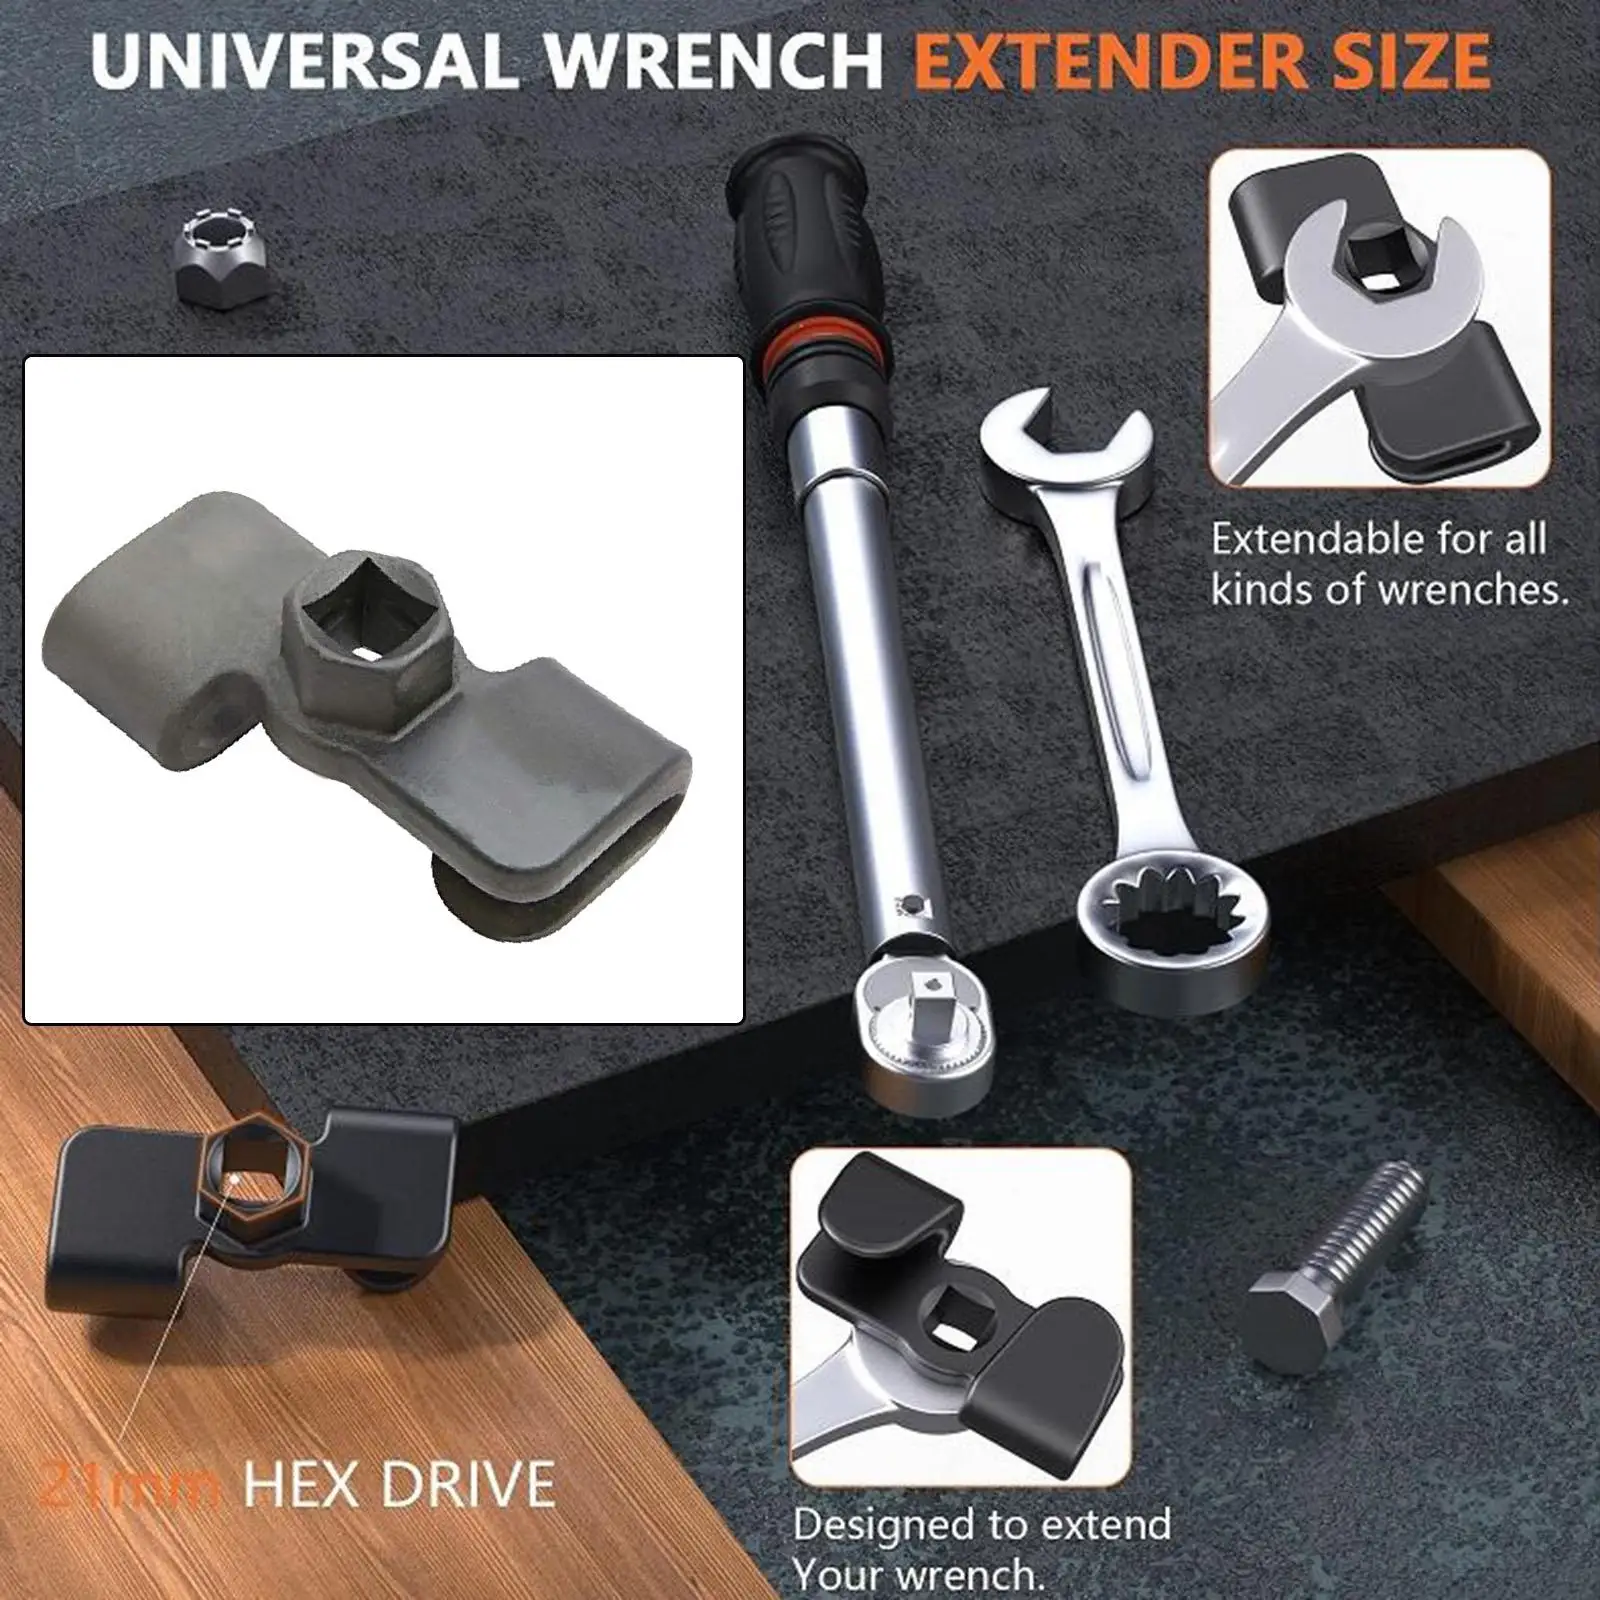 Wrench Extender Adaptor Practical Hardware Universal for 1/2 inch Drive 21mm Hex Leverage Stubborn Nuts&Bolts Cheater Bar